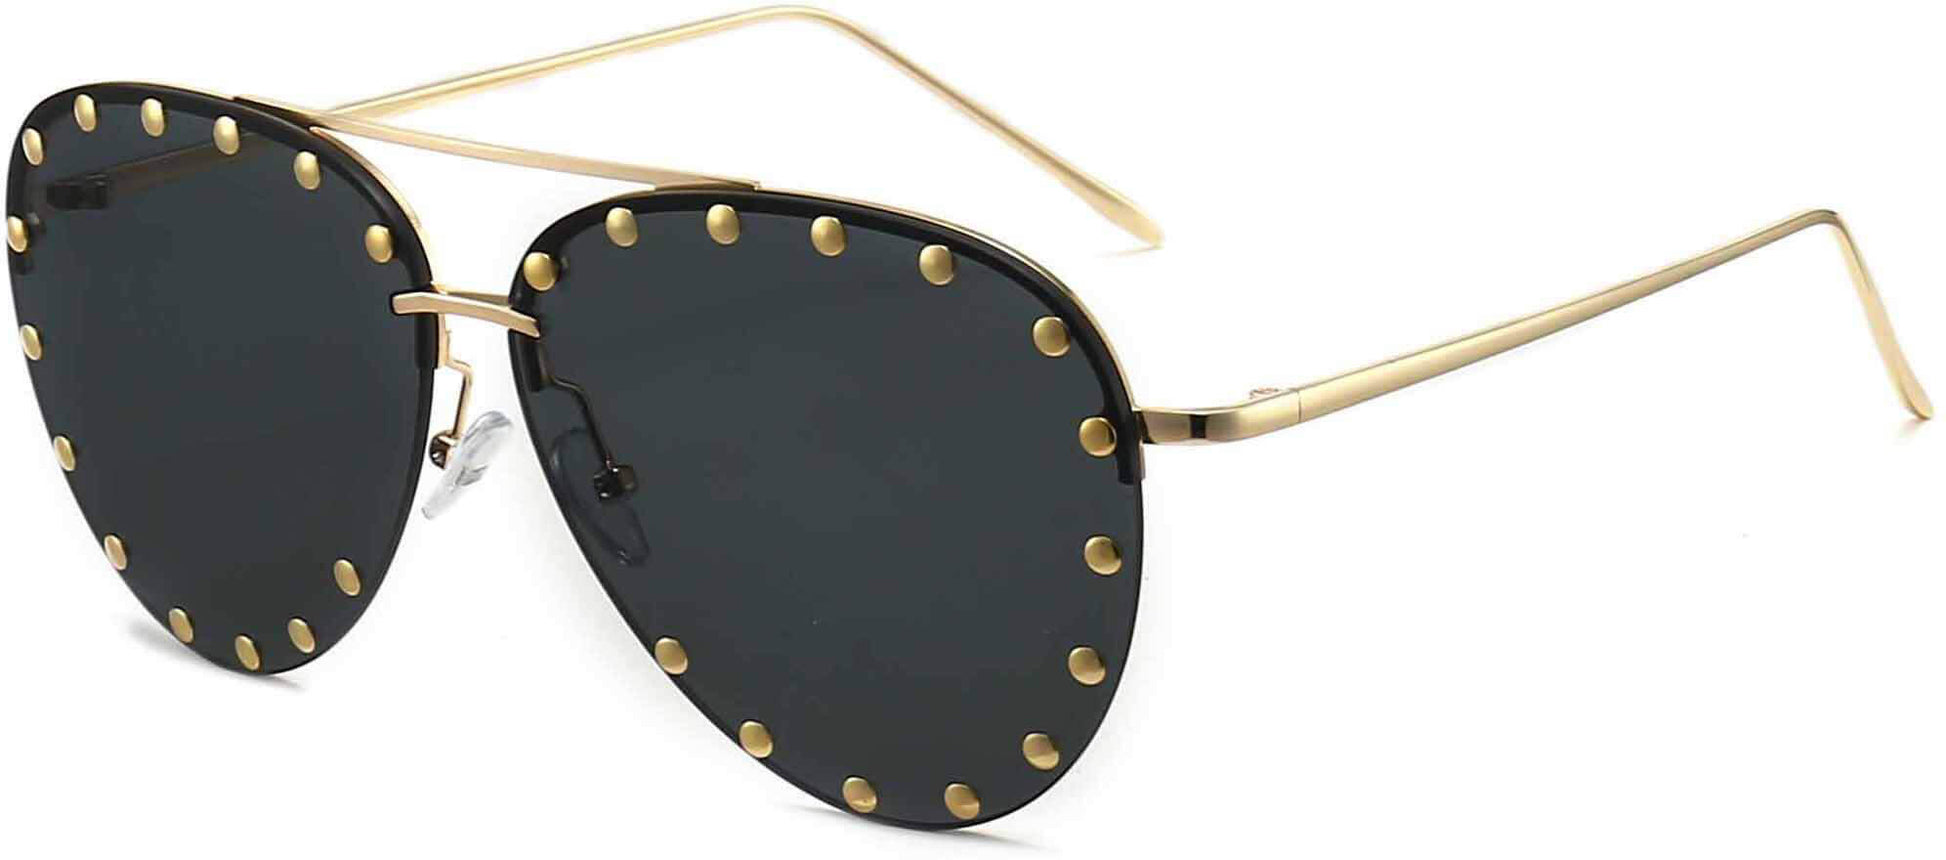 Allison Gold Stainless steel Sunglasses from ANRRI, angle view